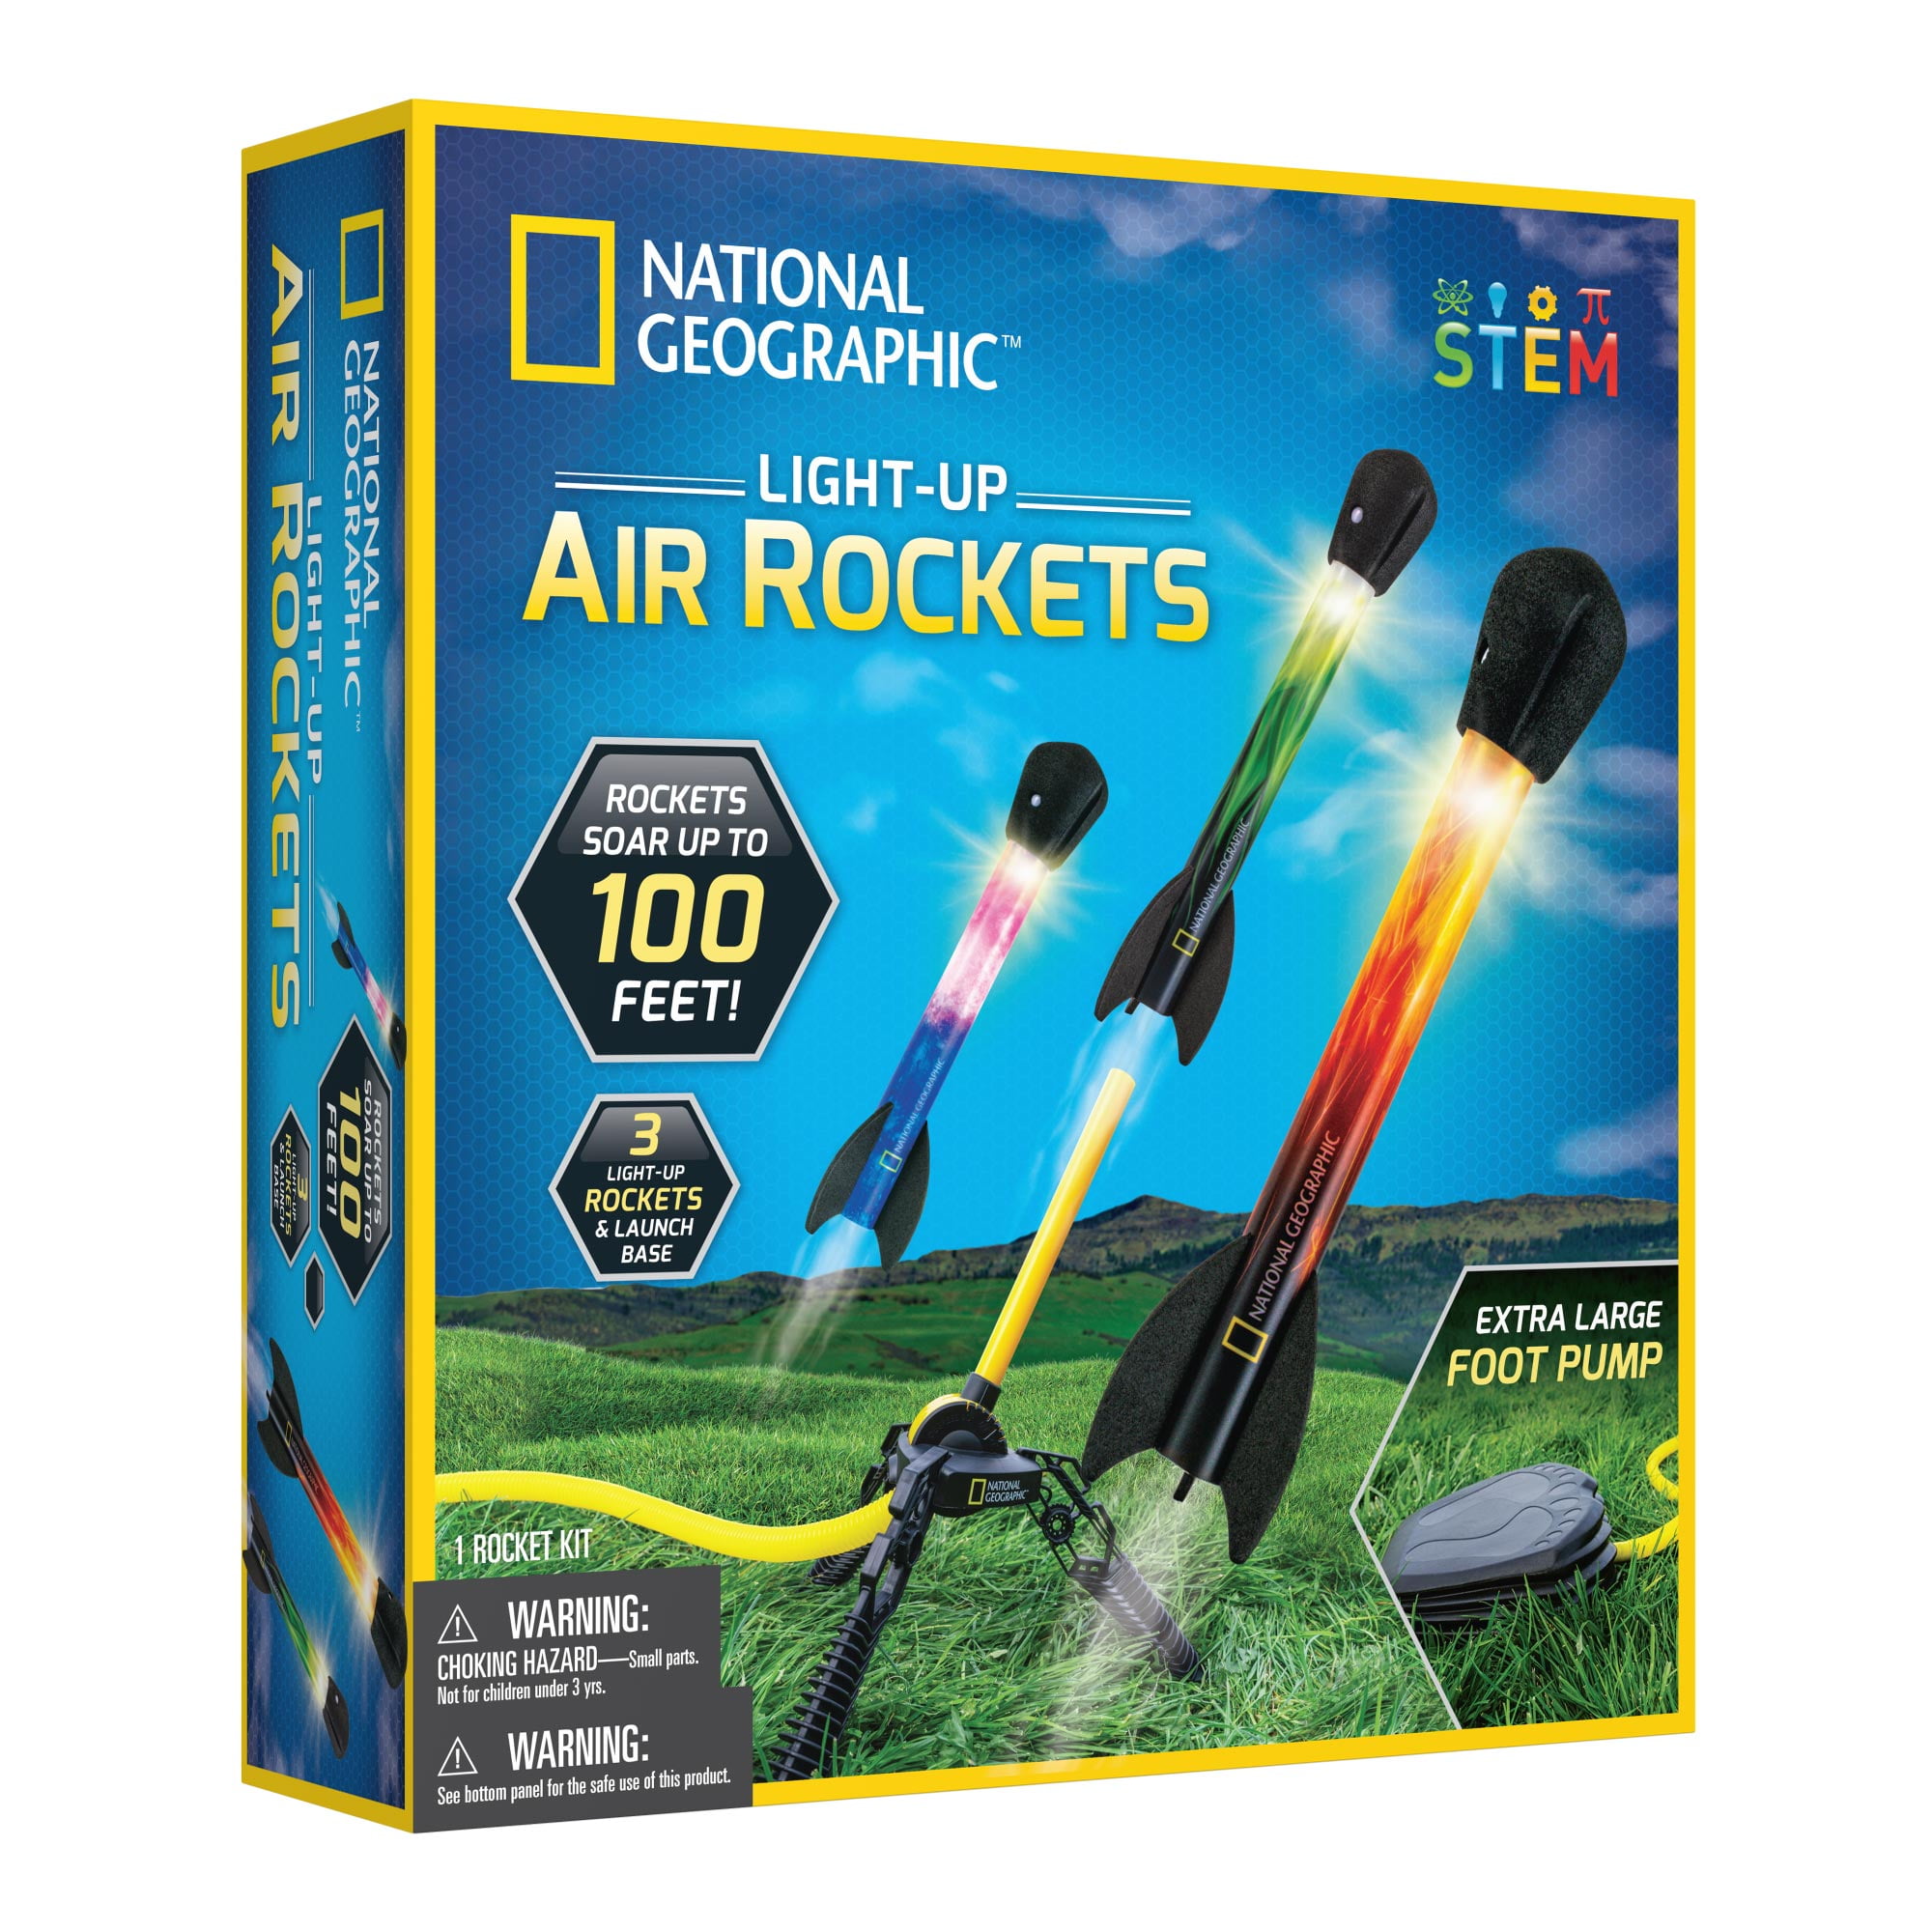 Ultimate LED Rocket Launcher for Kids STEM National Geographic Air Rocket Toy 